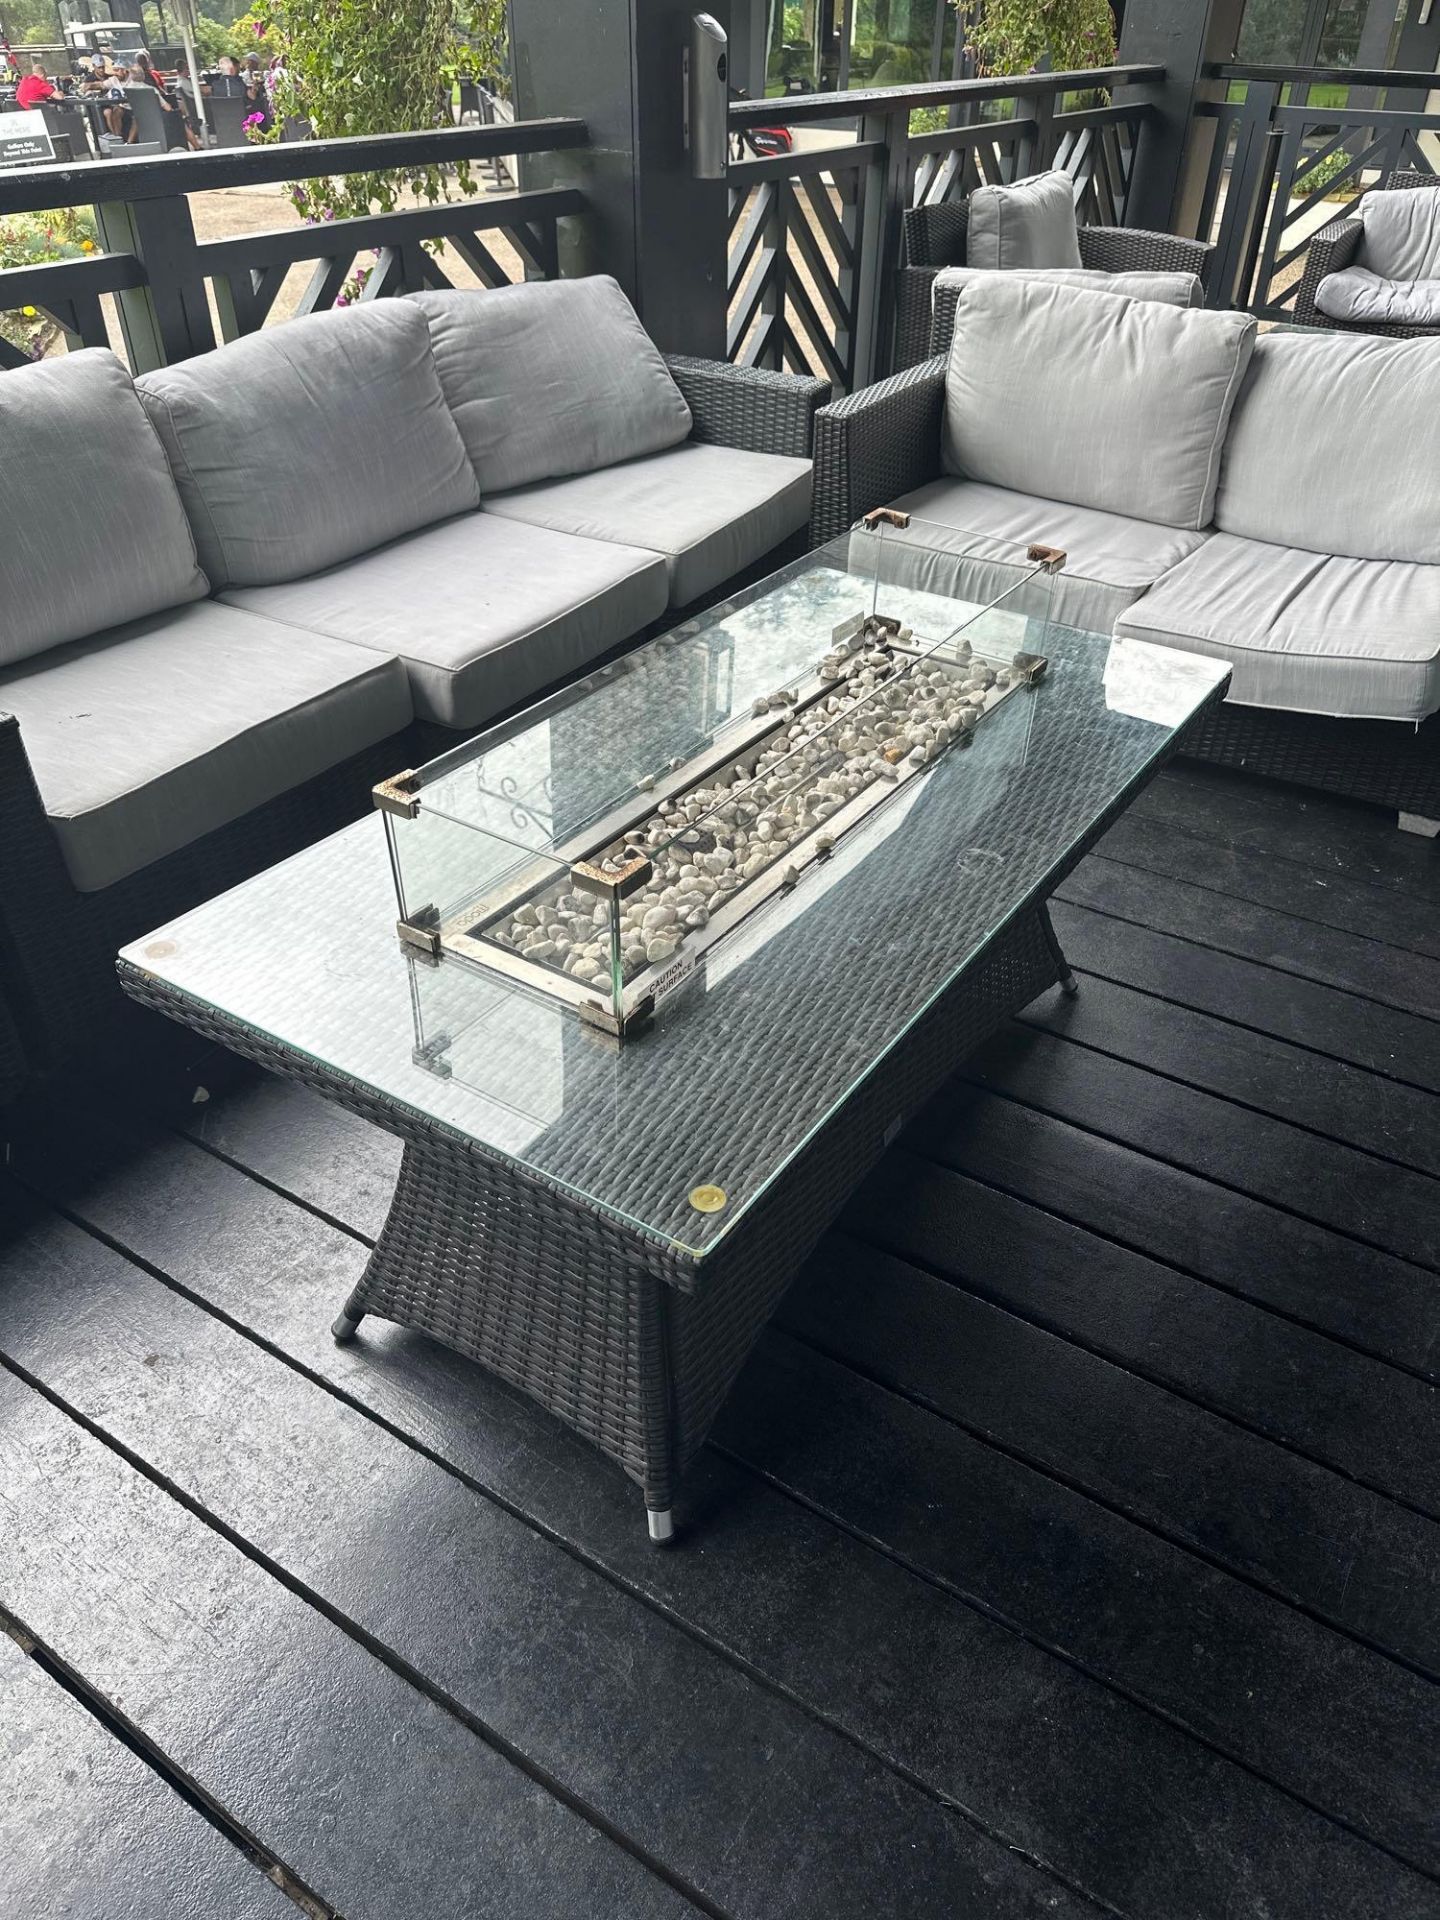 Wicker Propane Gas Fire Pit Table 140 x 73 x 78cm ( Location: Garden) - Image 2 of 3